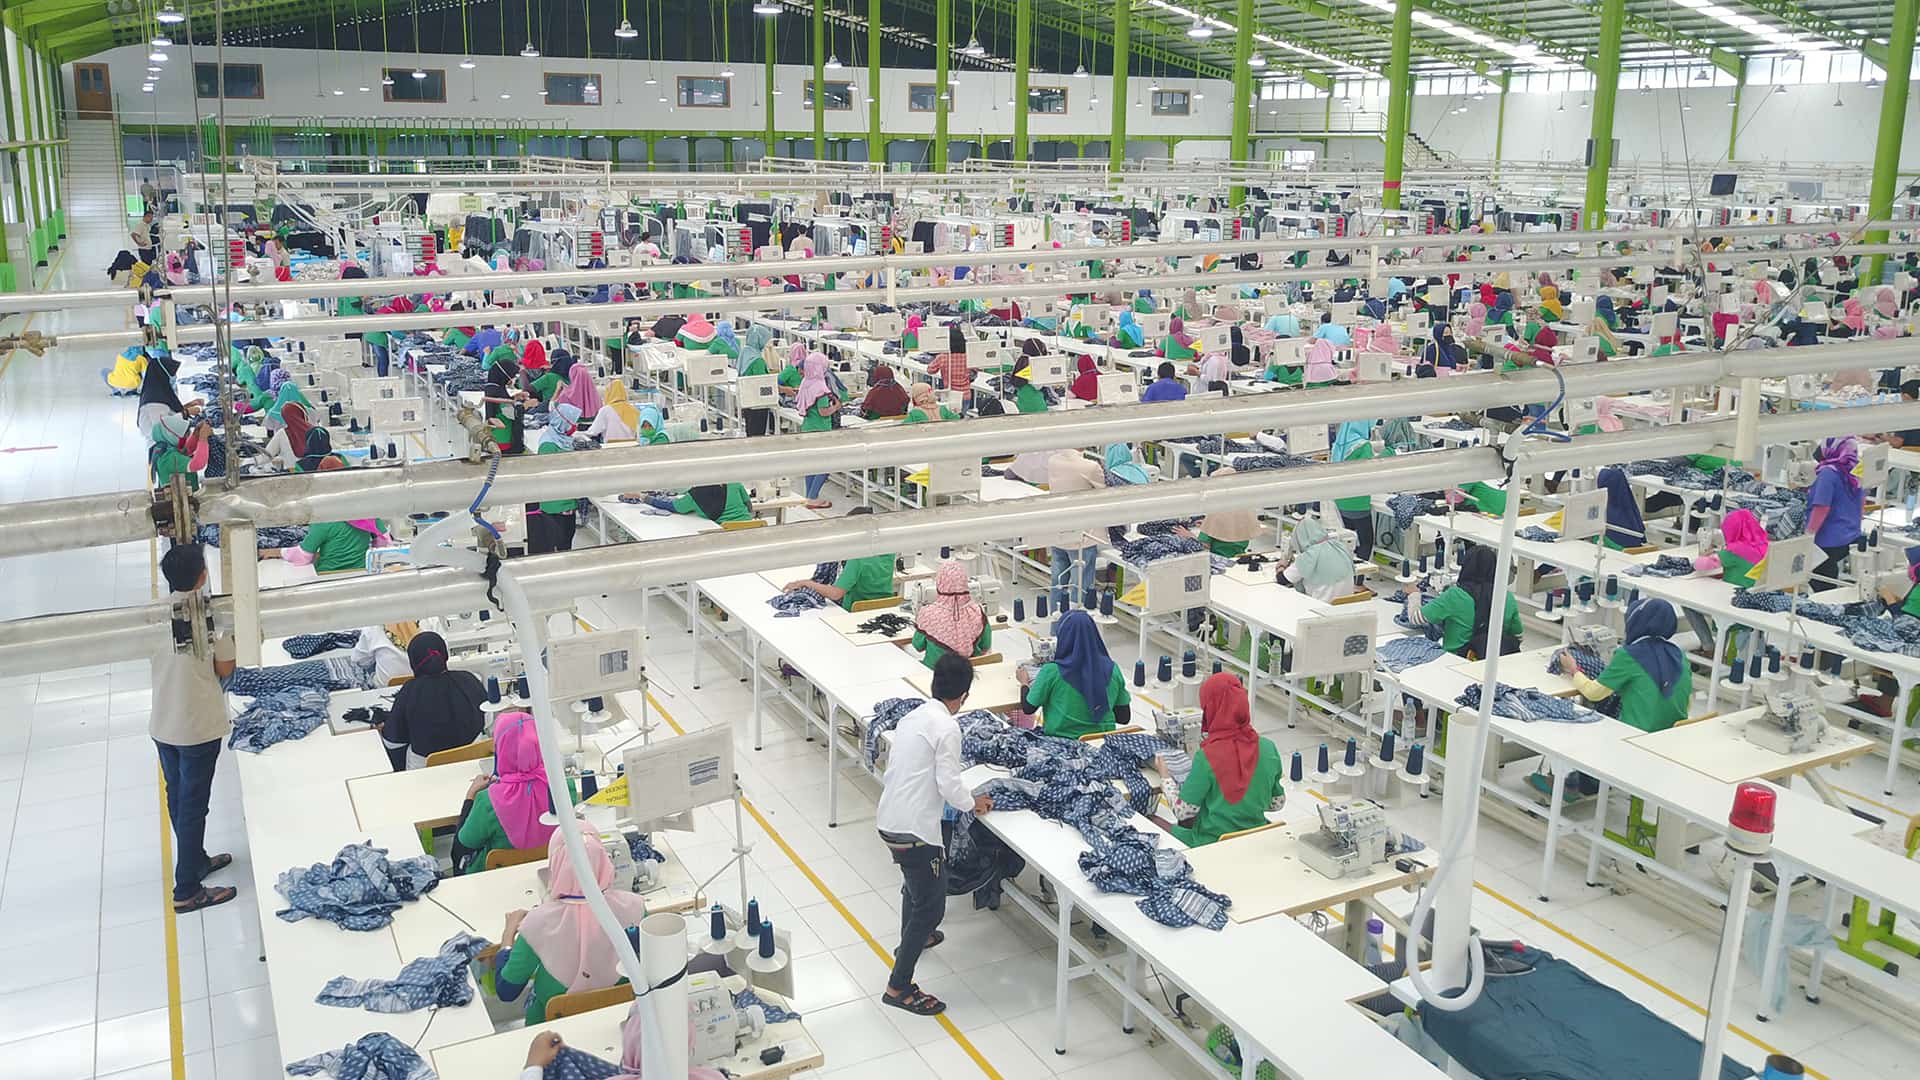 A large warehouse filled with people working at sewing machines